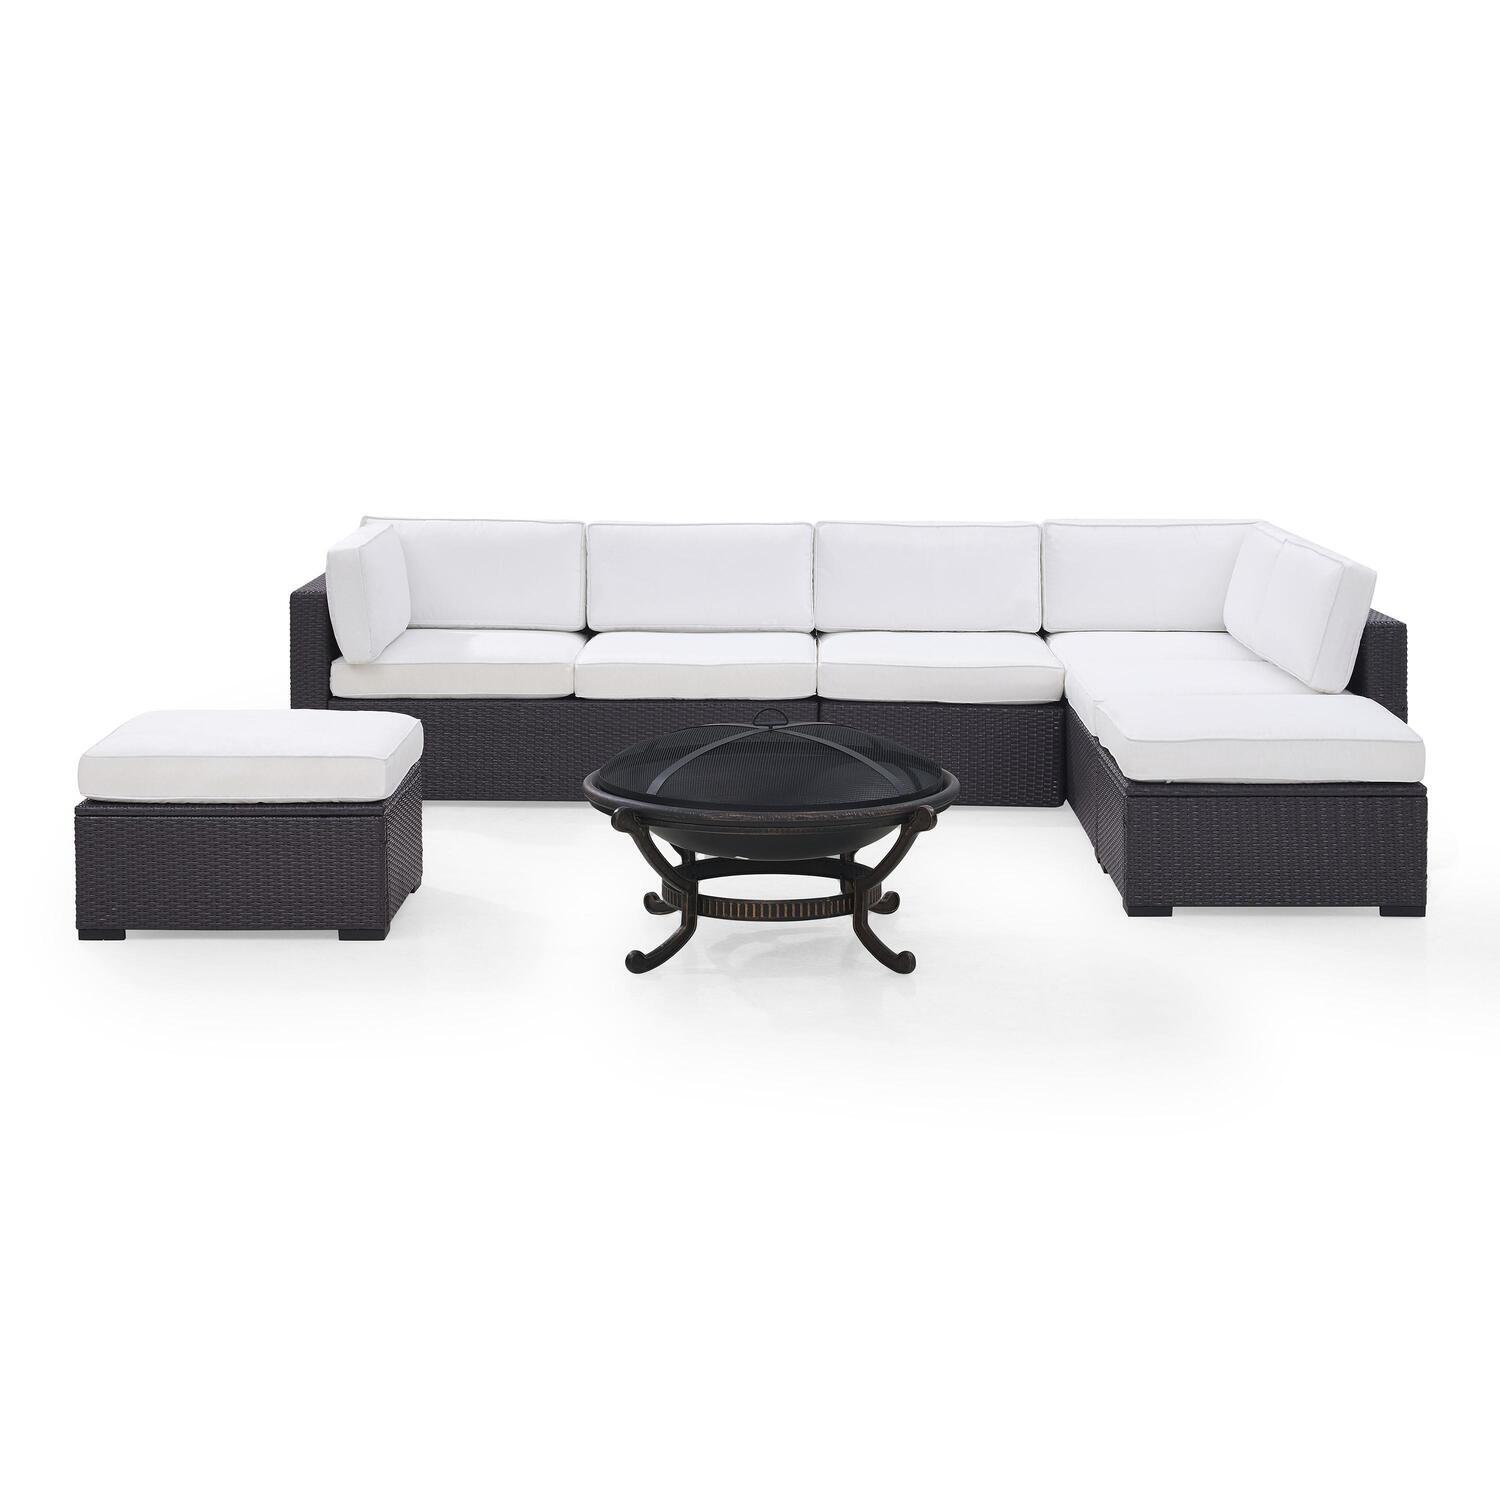 Crosley Furniture Biscayne 6 Piece Wicker Outdoor Sectional Set with Firepit - image 1 of 4